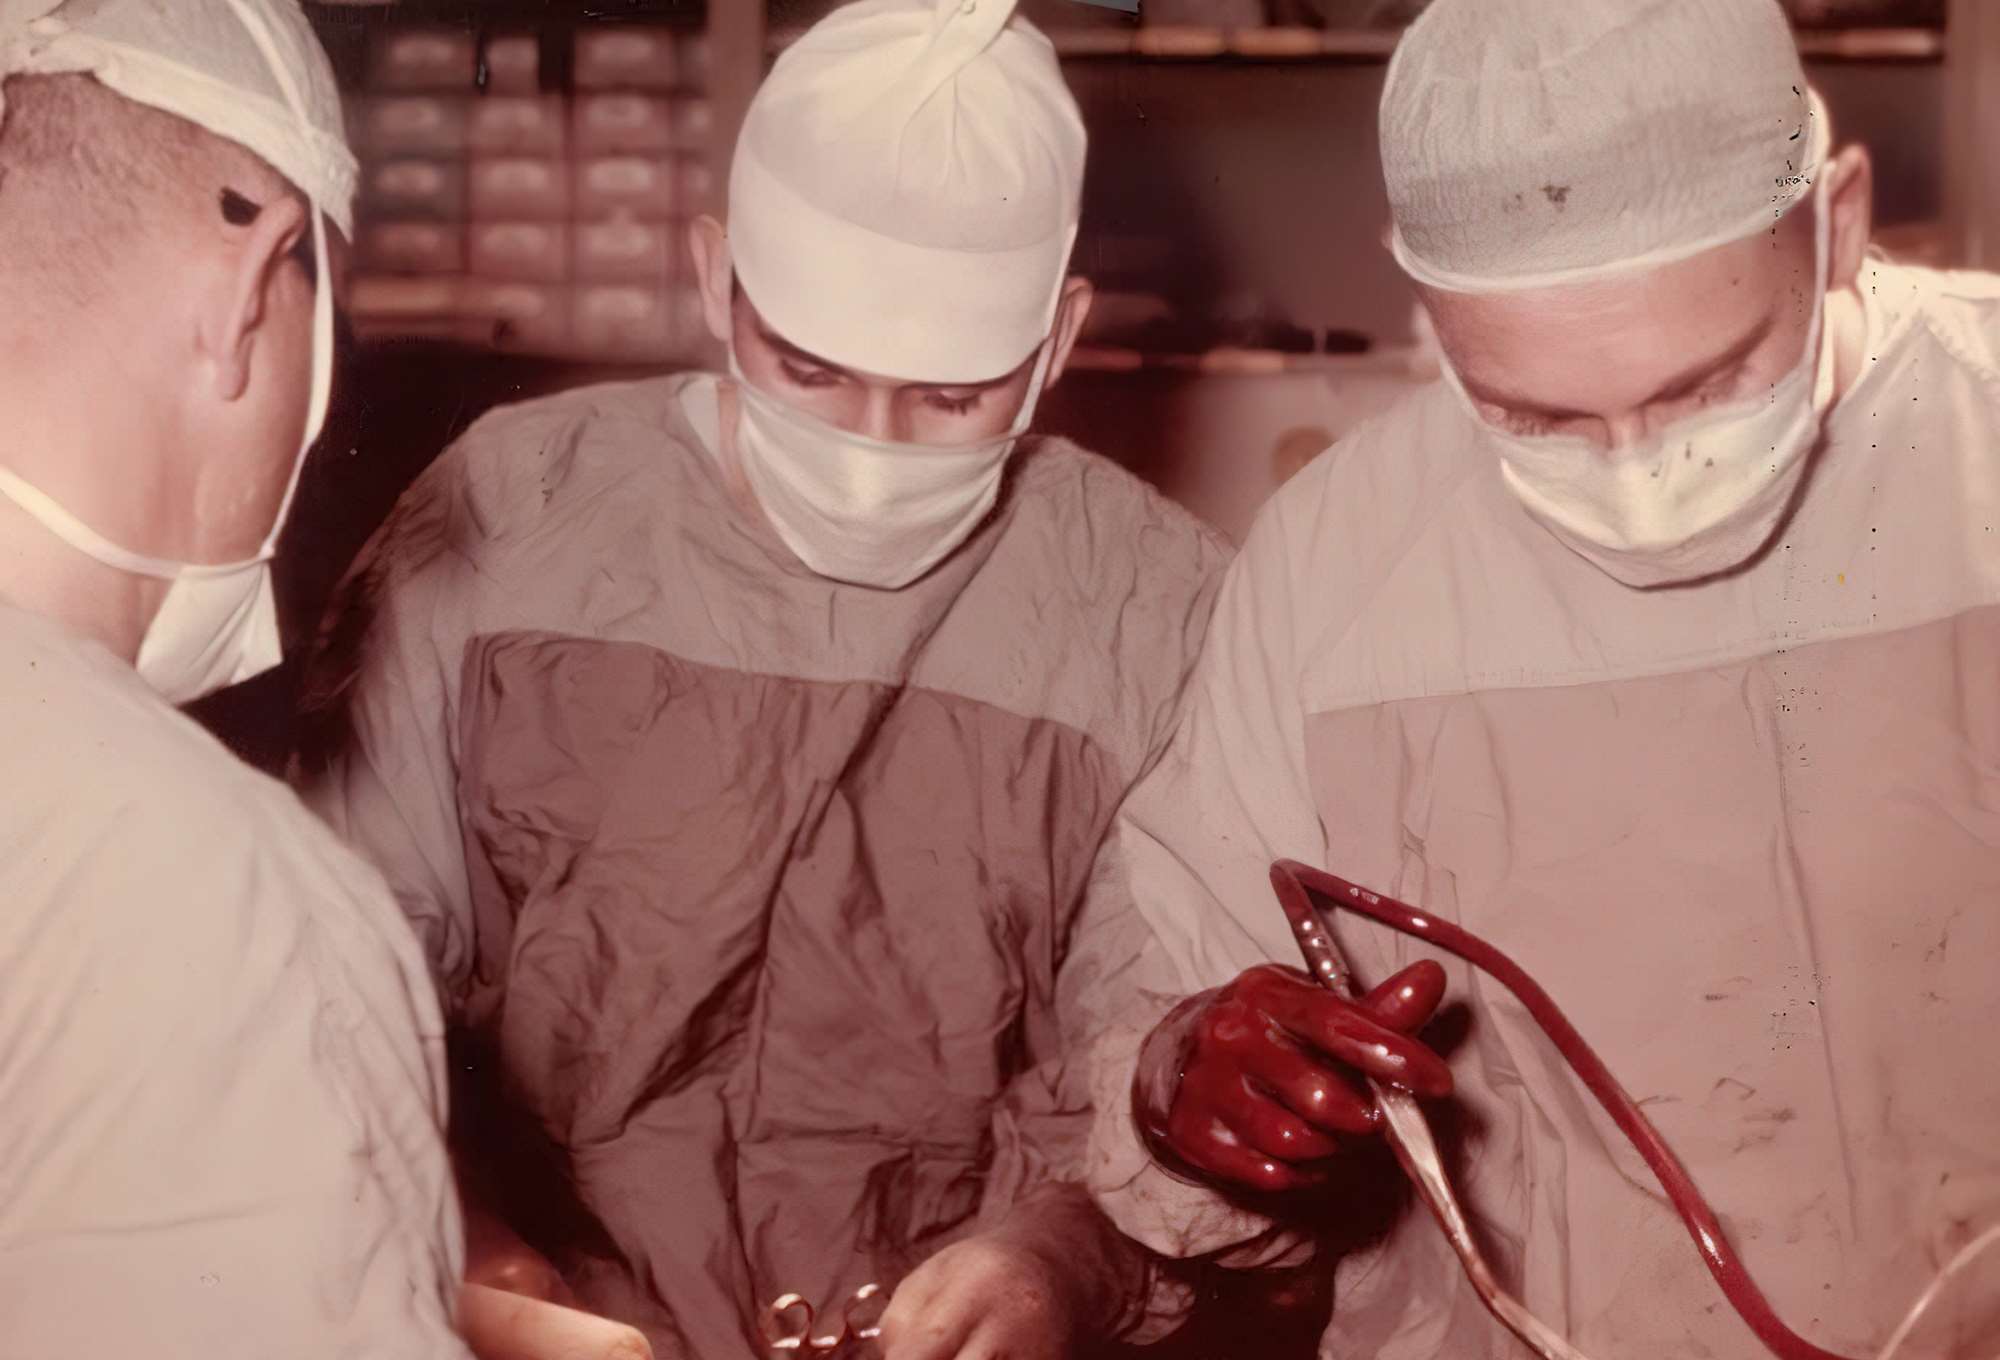 A career in cardiothoracic surgery that began with Wisconsin's first heart transplant